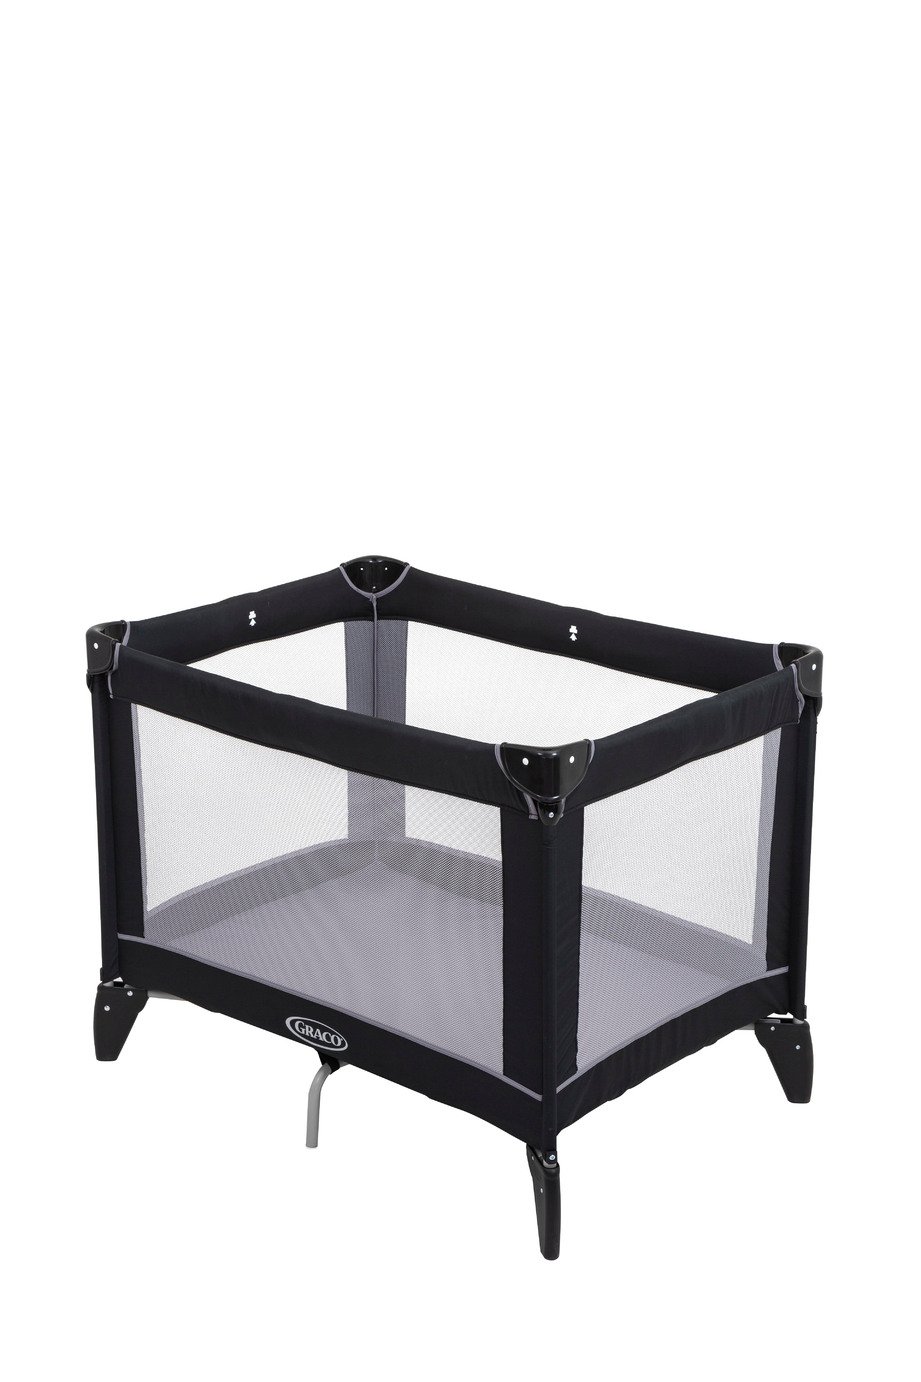 Graco Compact Travel Cot Review